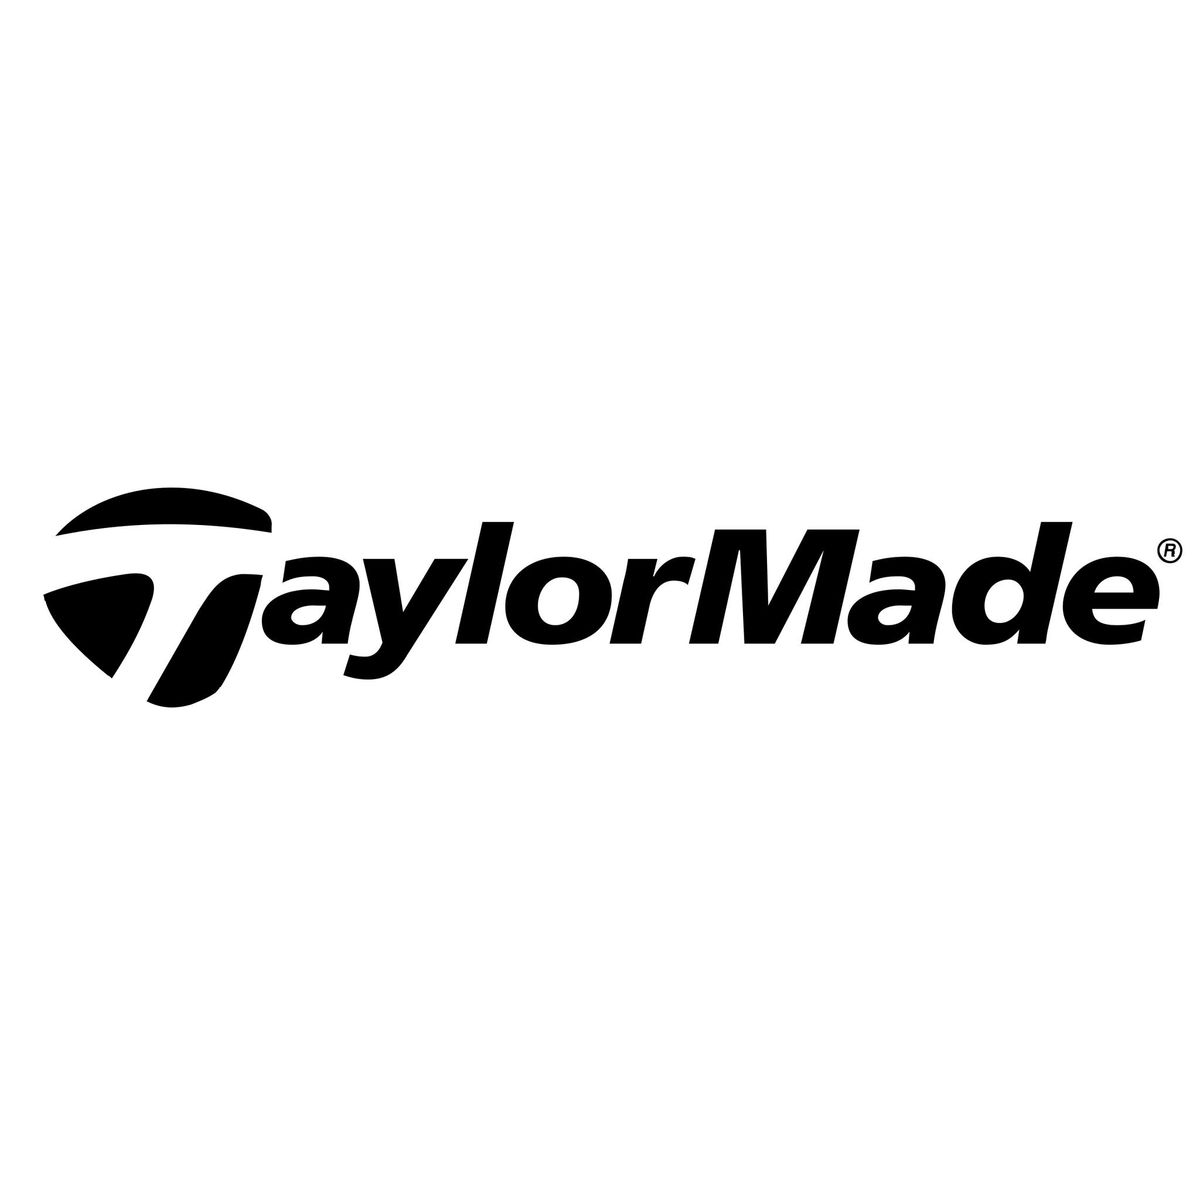 Taylormade Golf Club Fitting Event